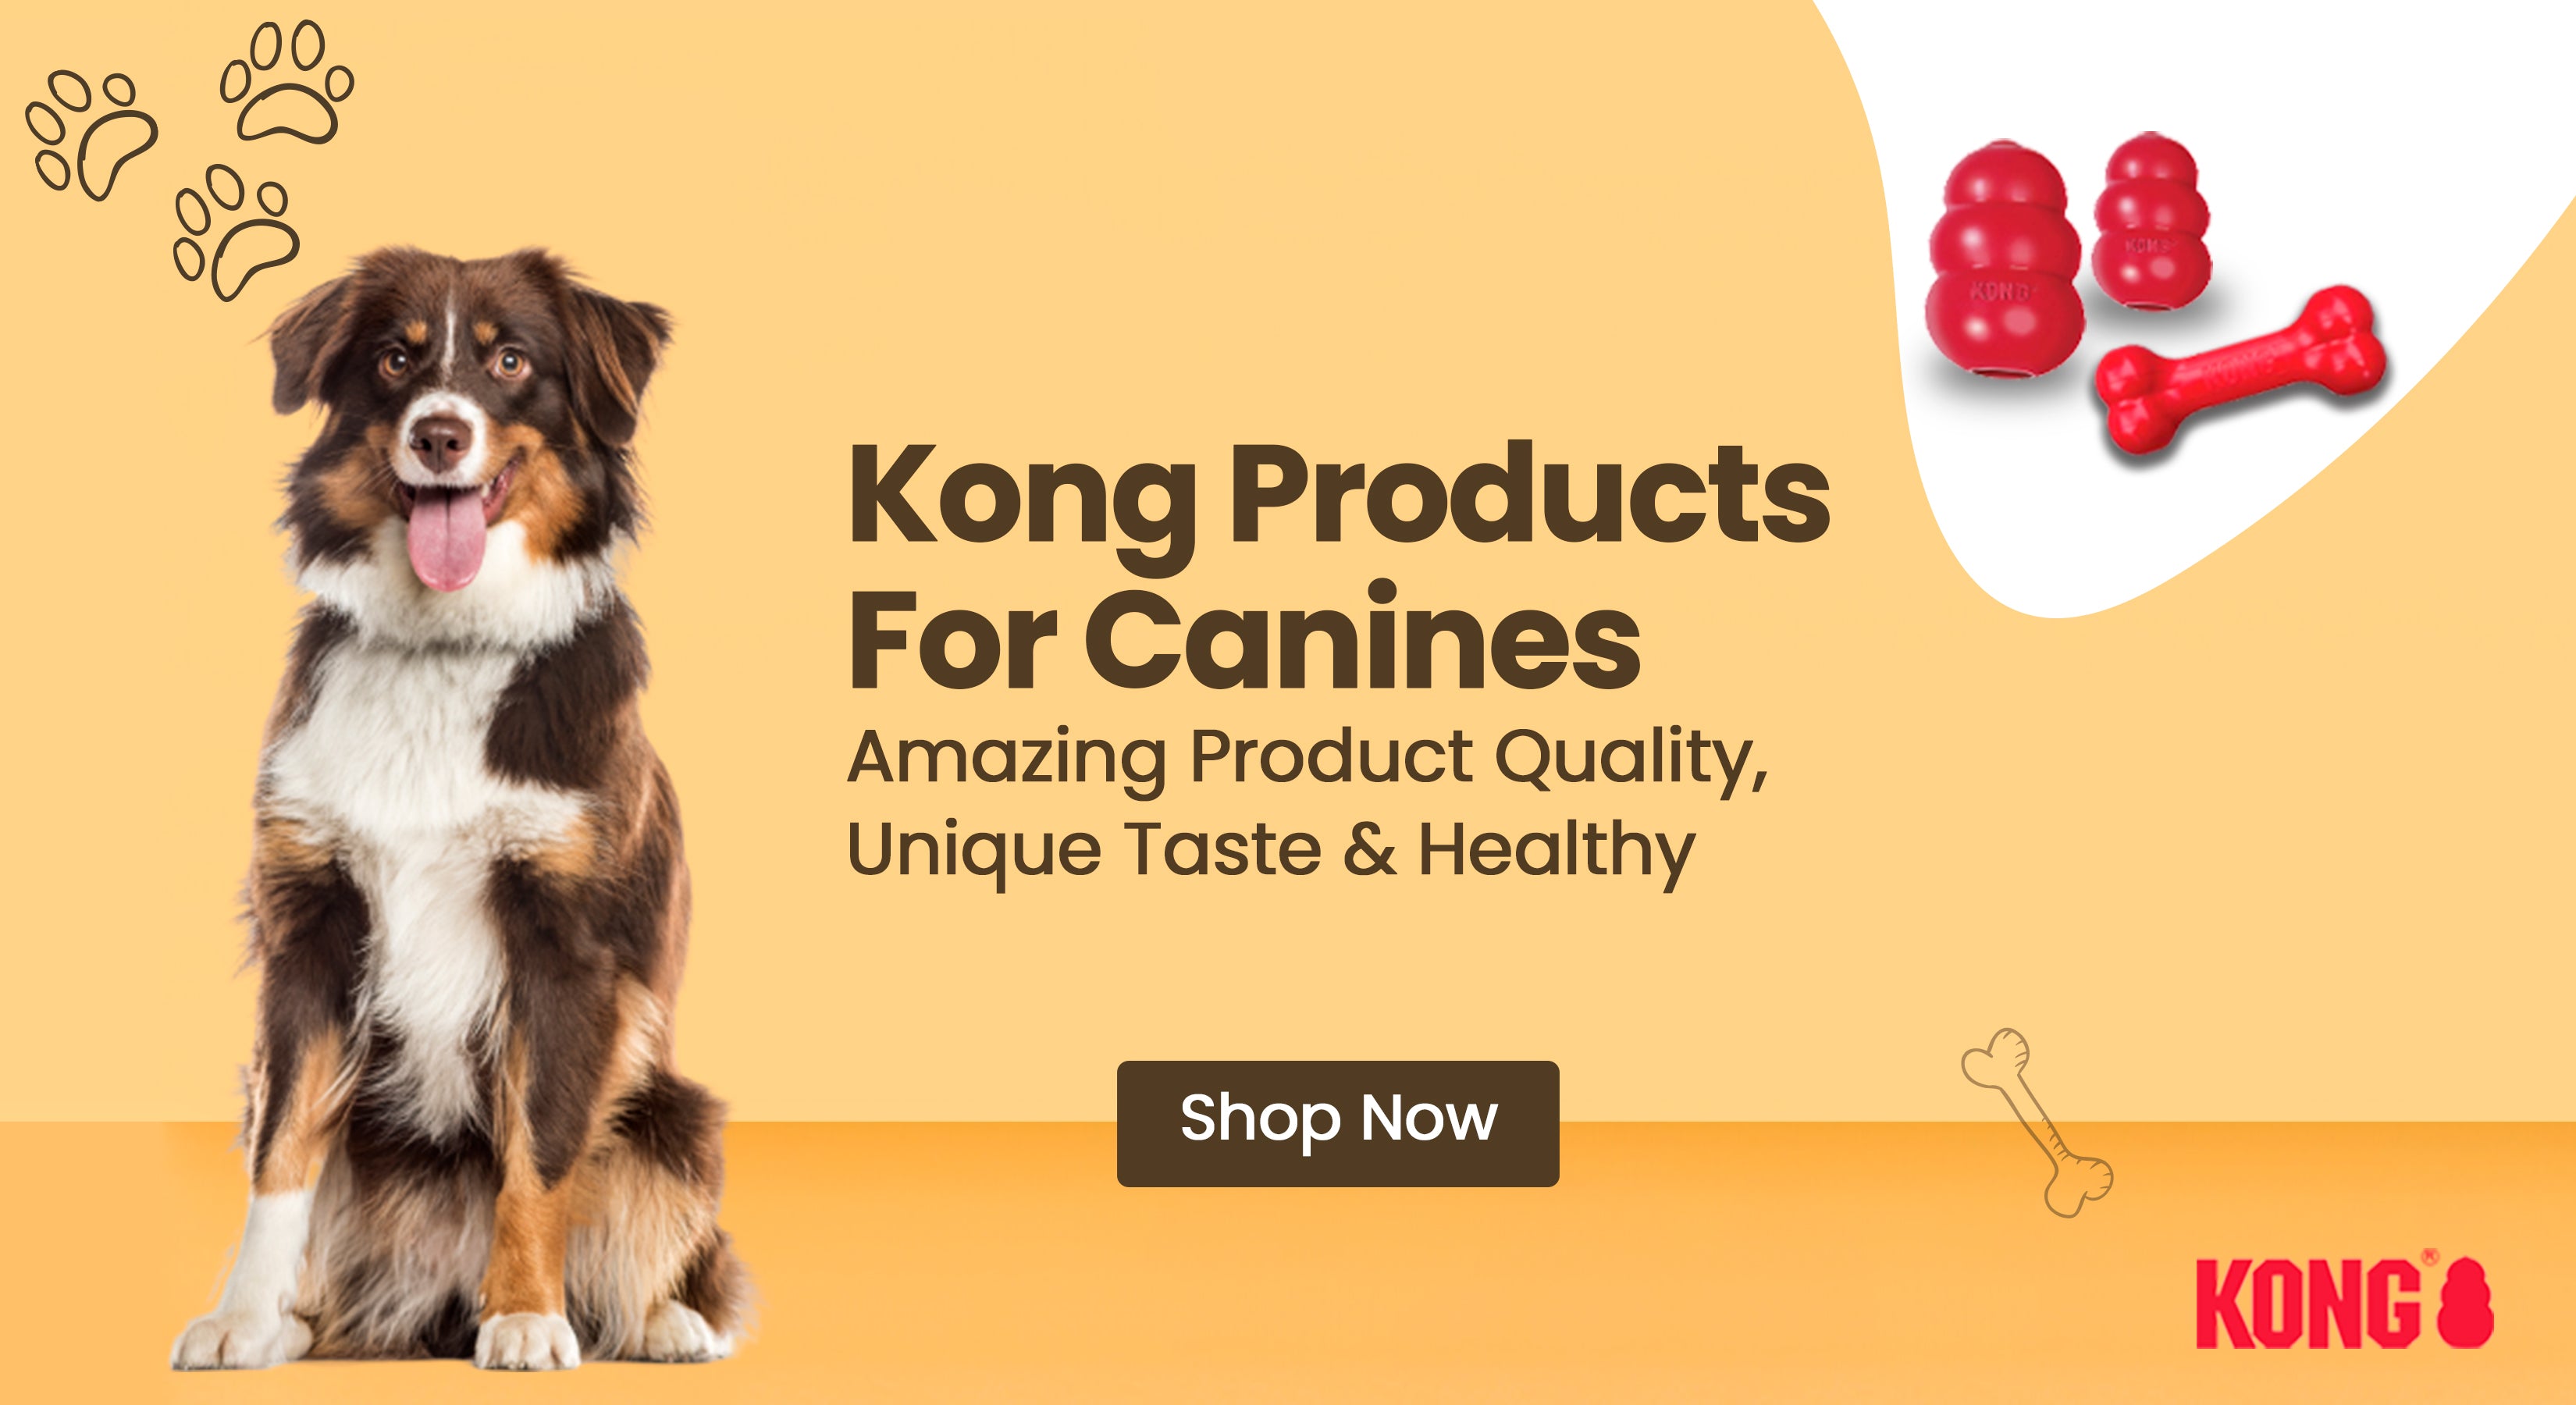 Kong Classic Red Rubber Mentally Stimulating Dog Toy Medium package, Pet  Care Supplies & Accessories